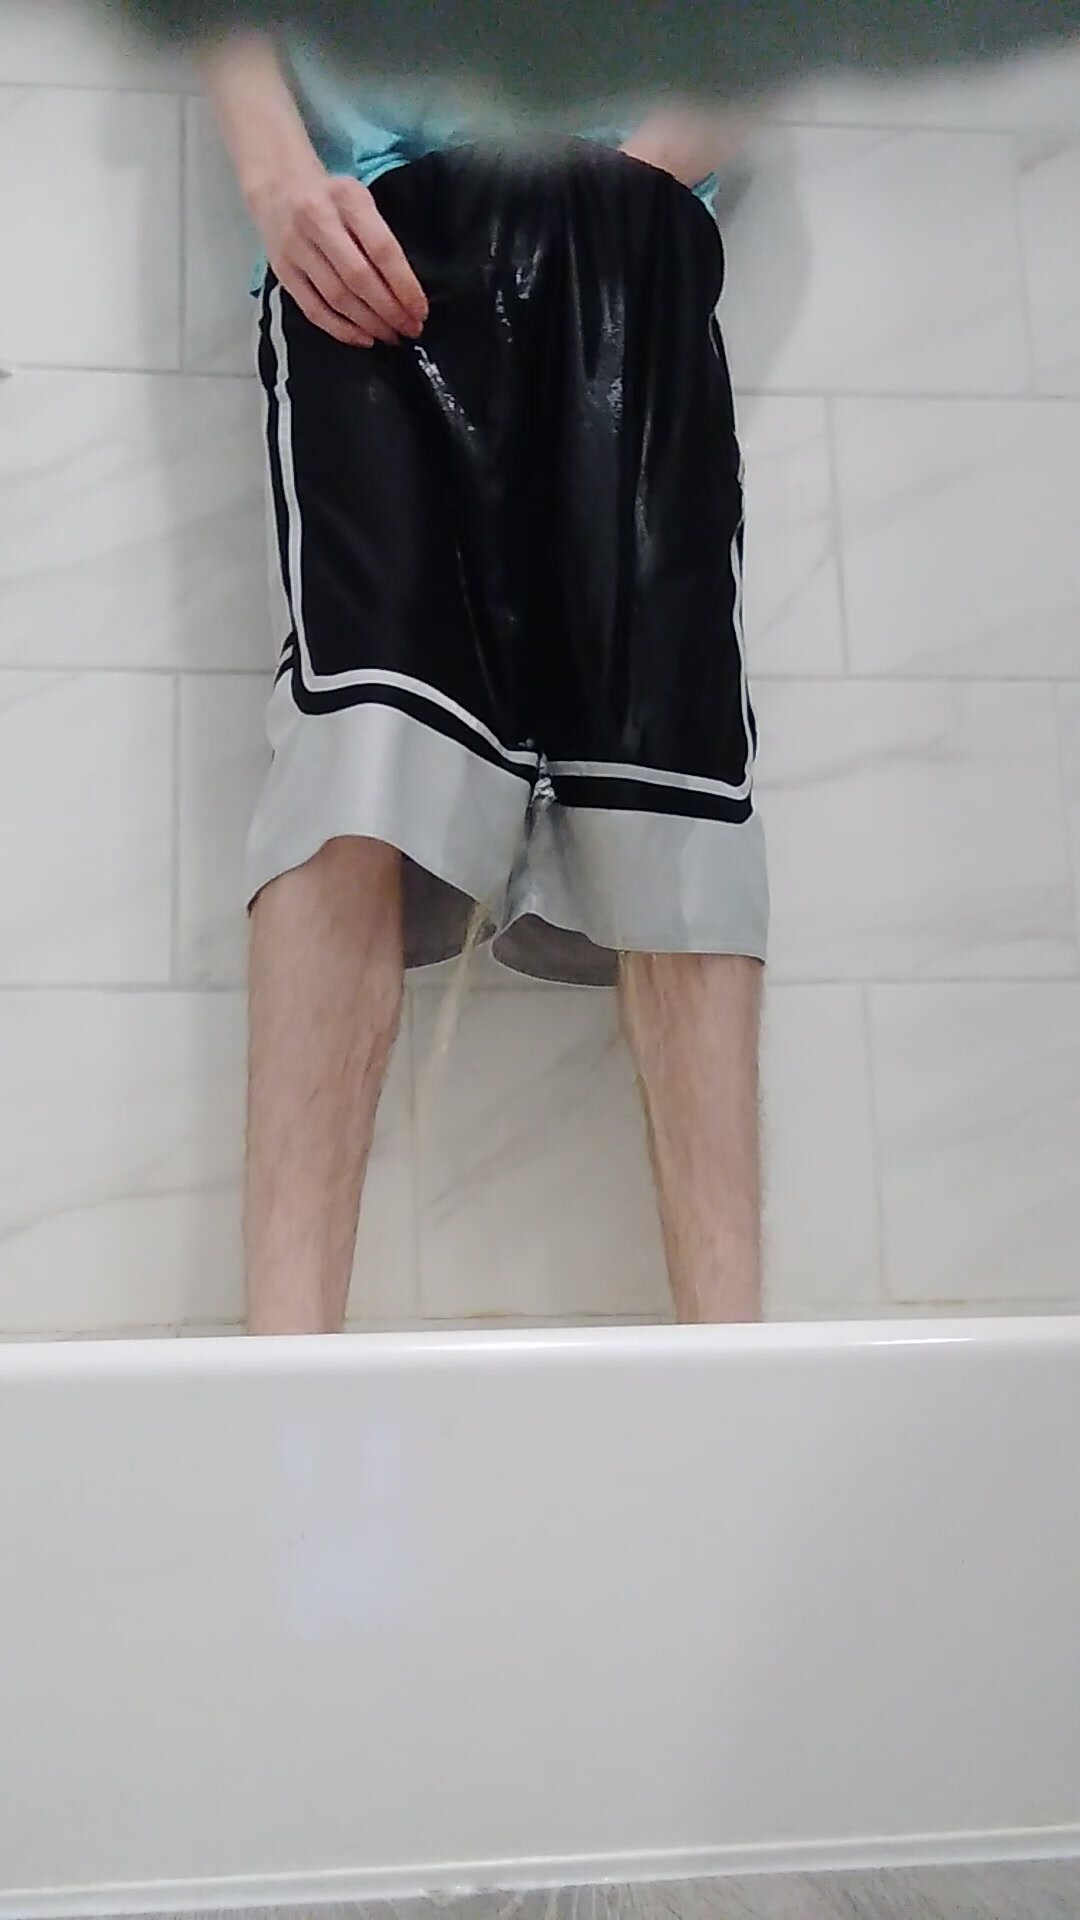 Pissing in my original deluxe shorts